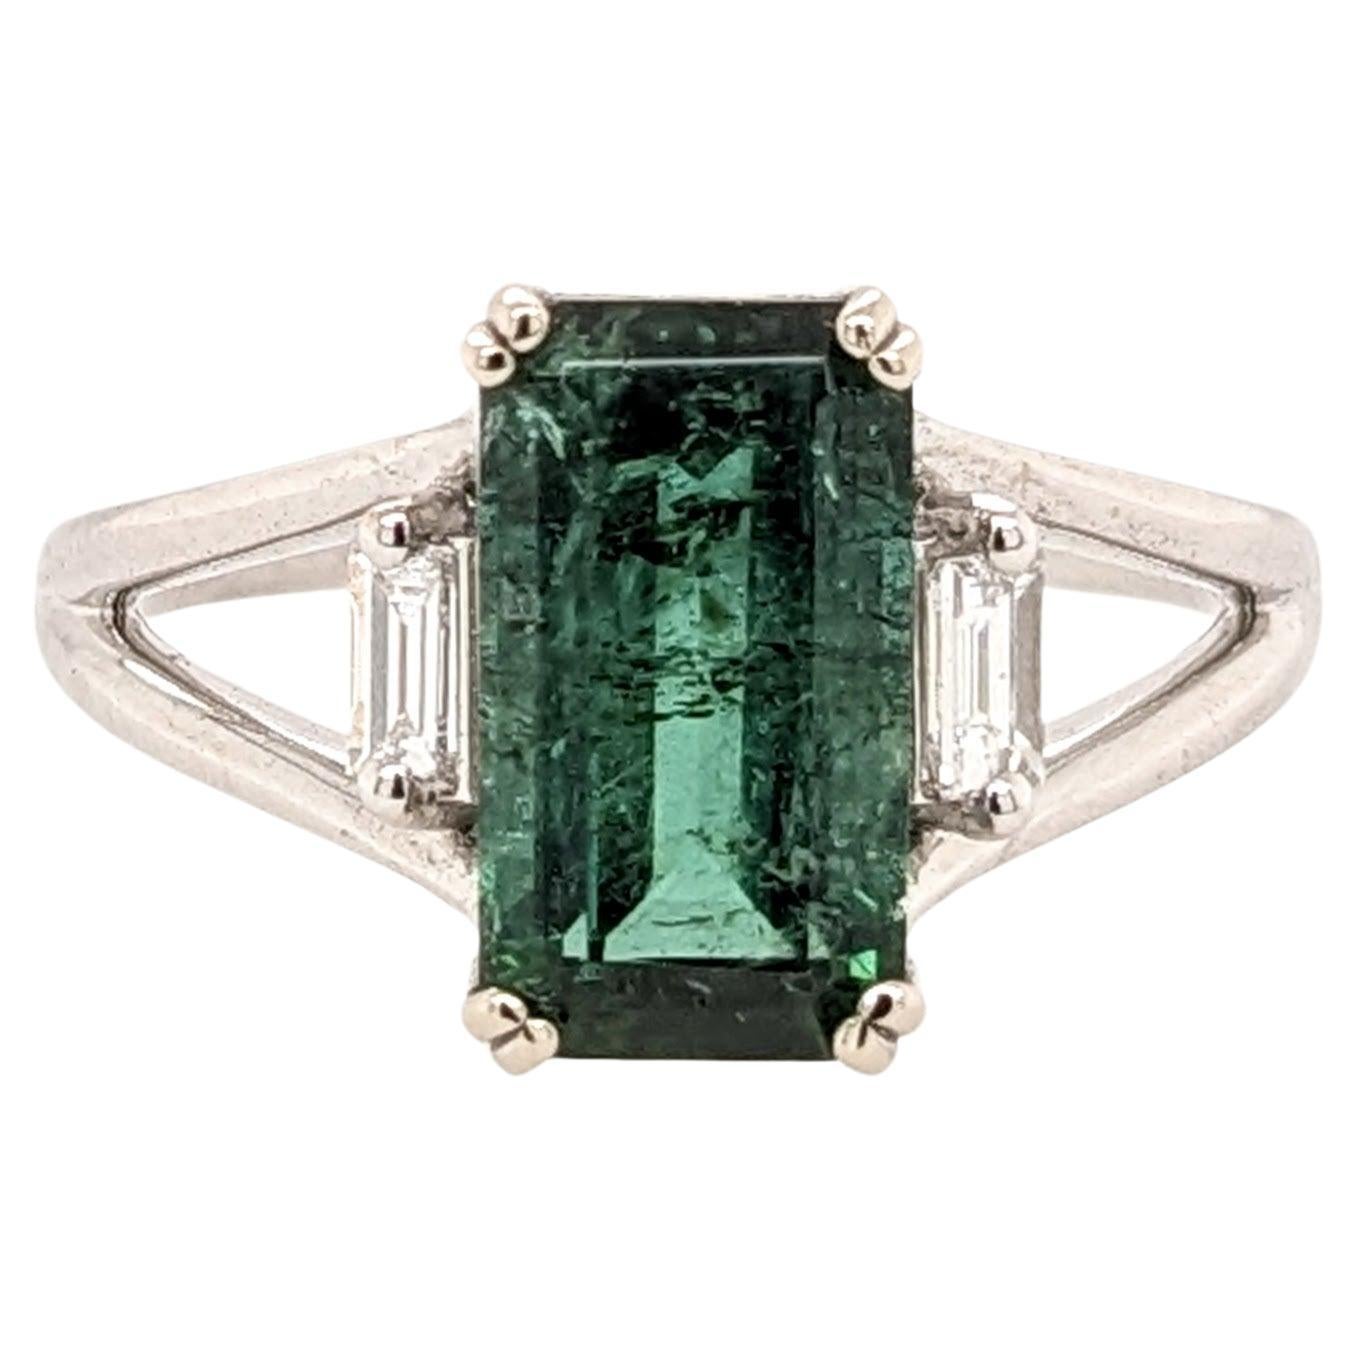 2.57ct Tourmaline w Diamond Accents in 14K Solid White Gold Emerald Cut 10x6mm For Sale